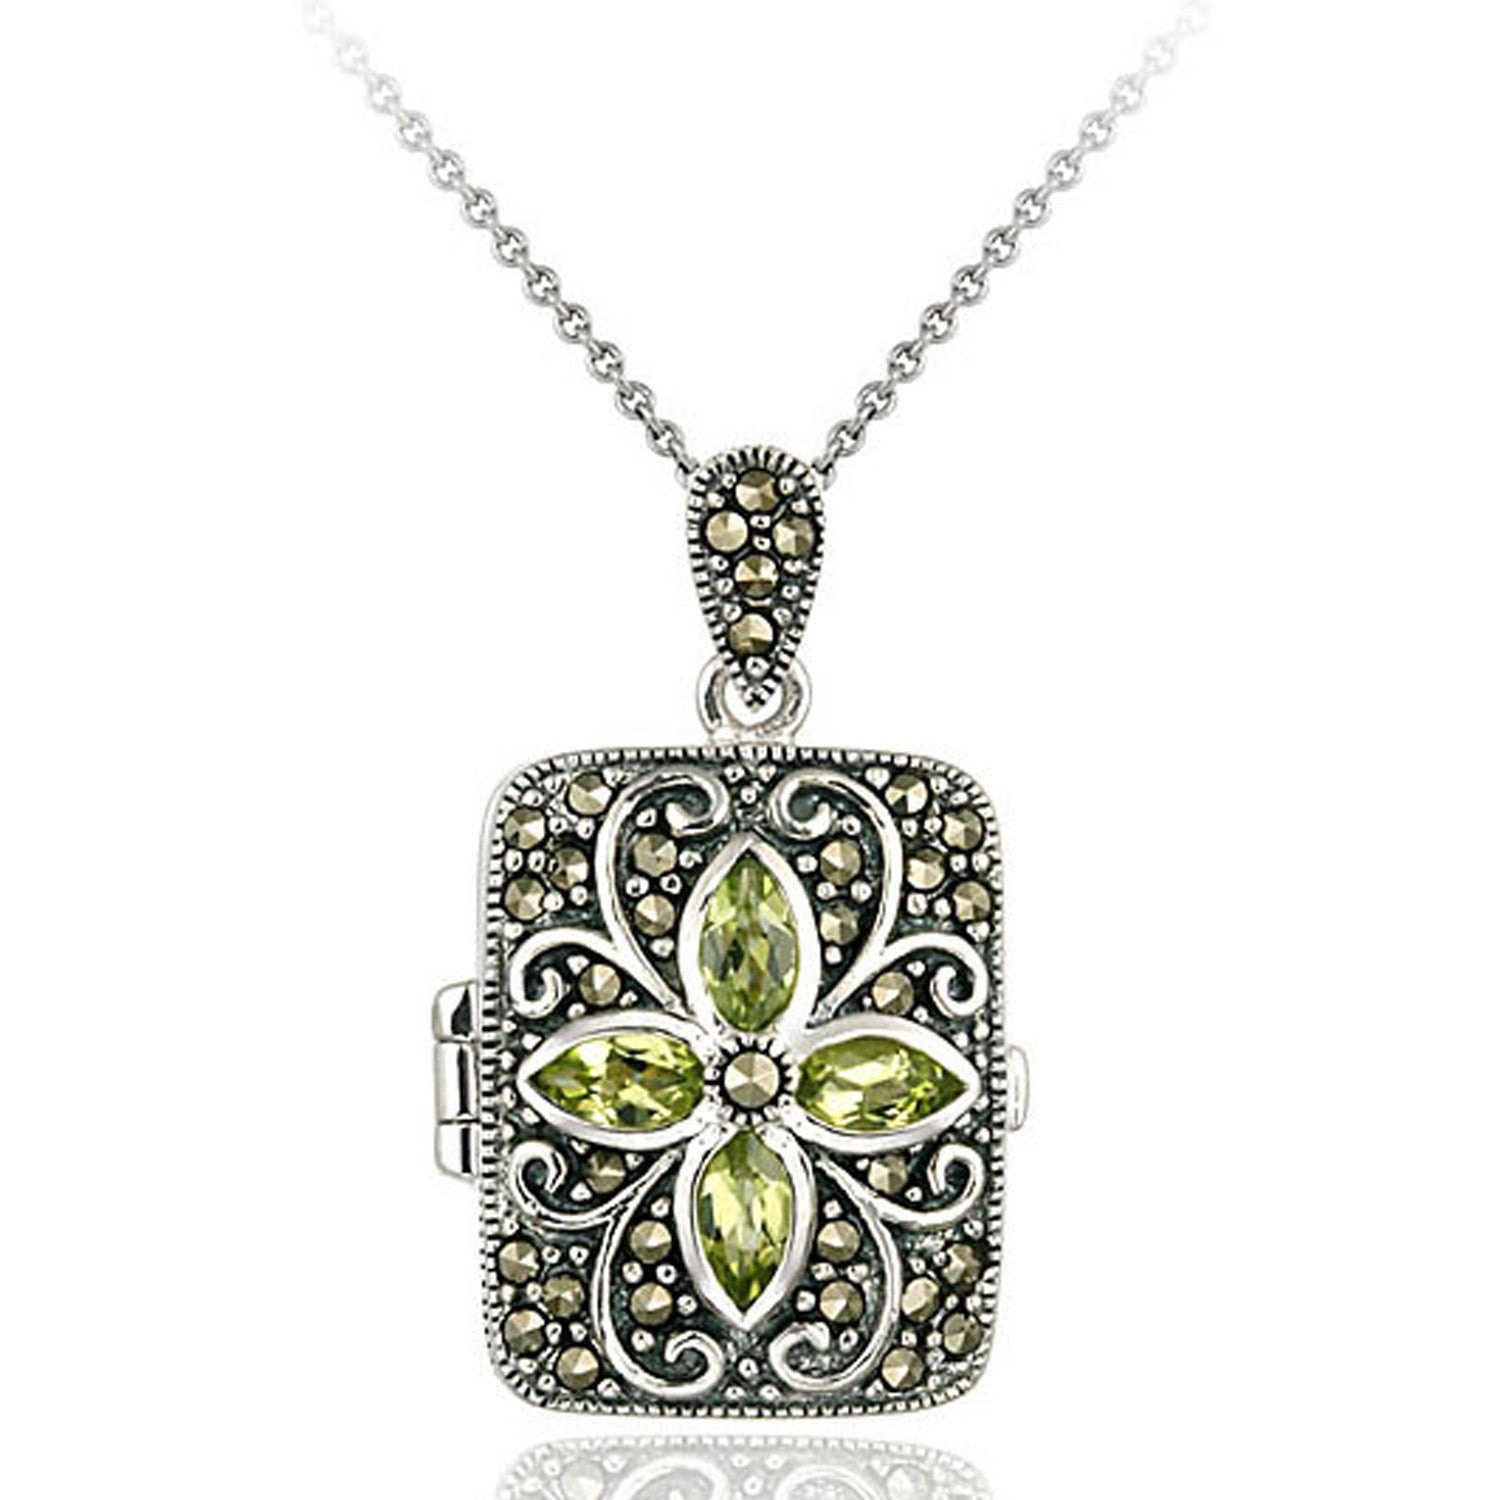 Marcasite & Gemstone Accented Sterling Silver Locket Necklace - Peridot